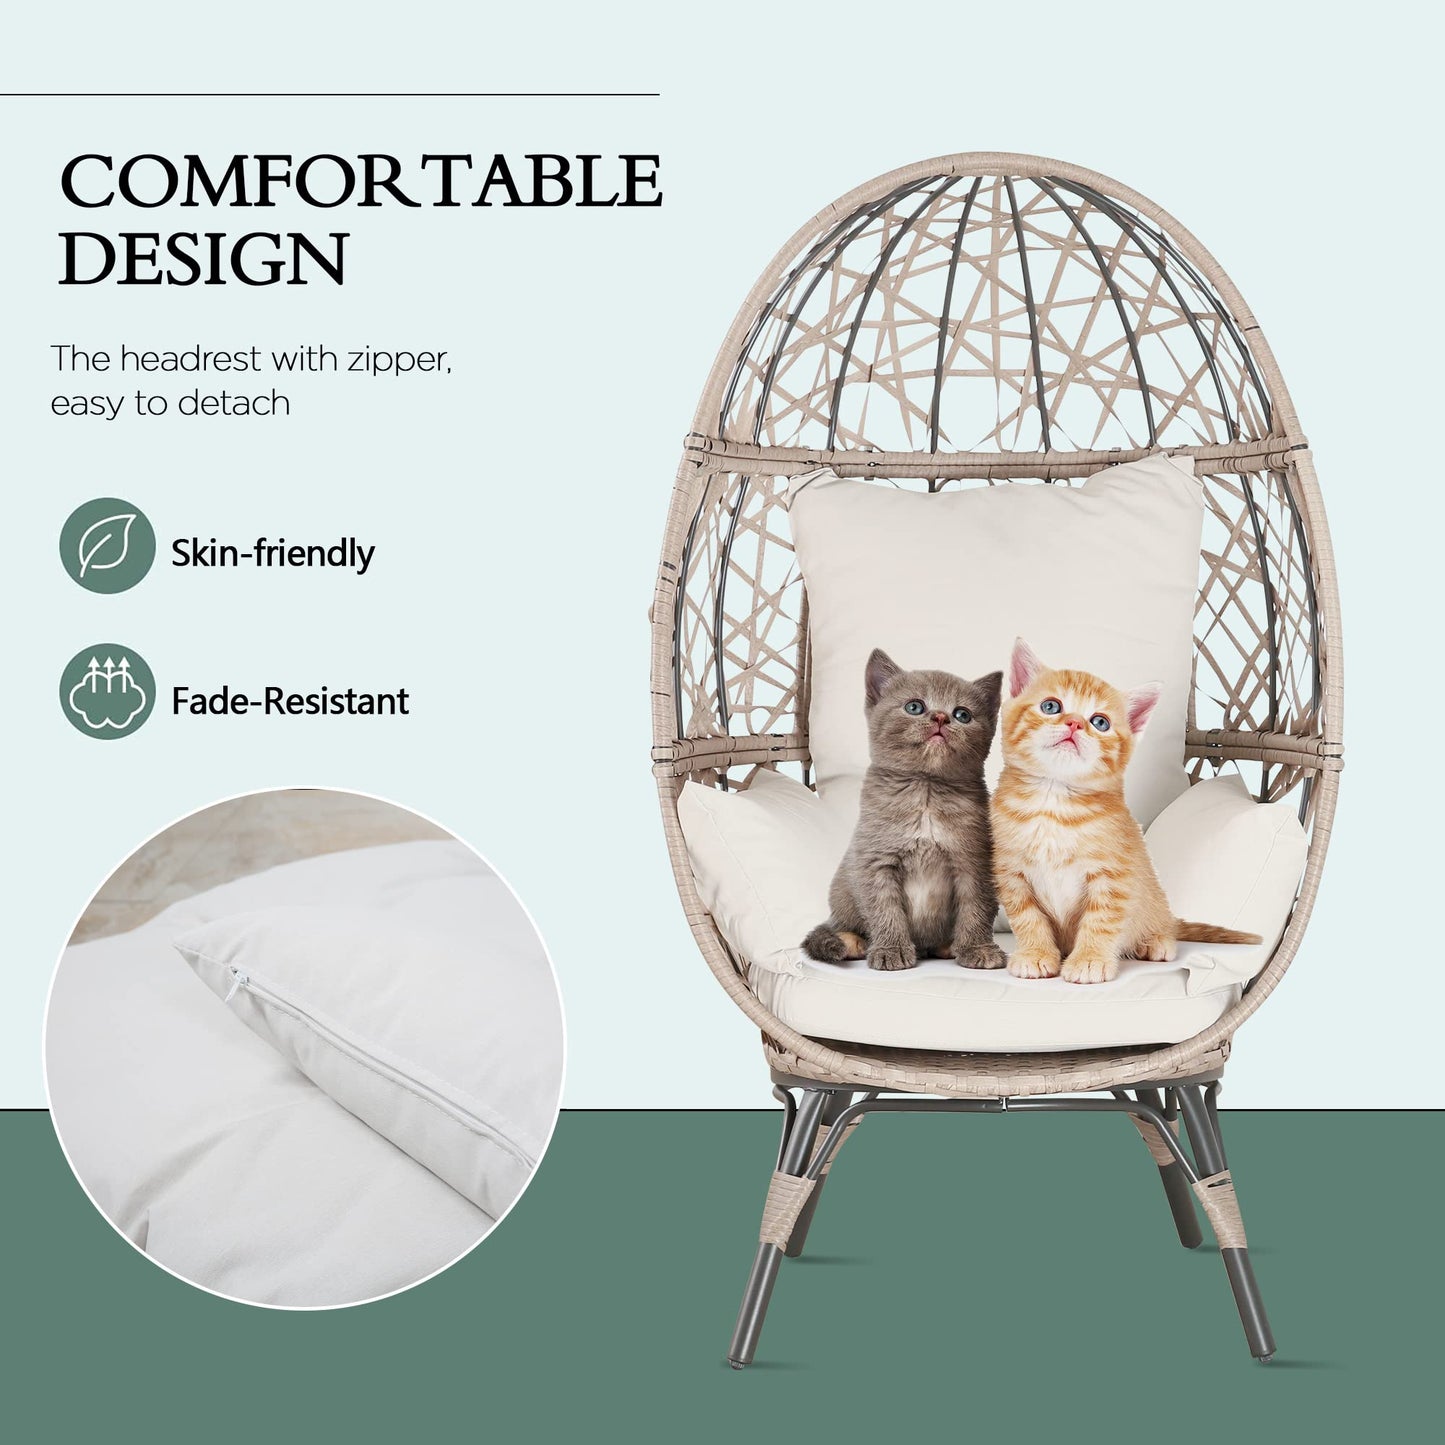 Outdoor Teardrop Wicker Lounge Chair Indoor Patio Rattan Egg Chair with Cushion and Pillow